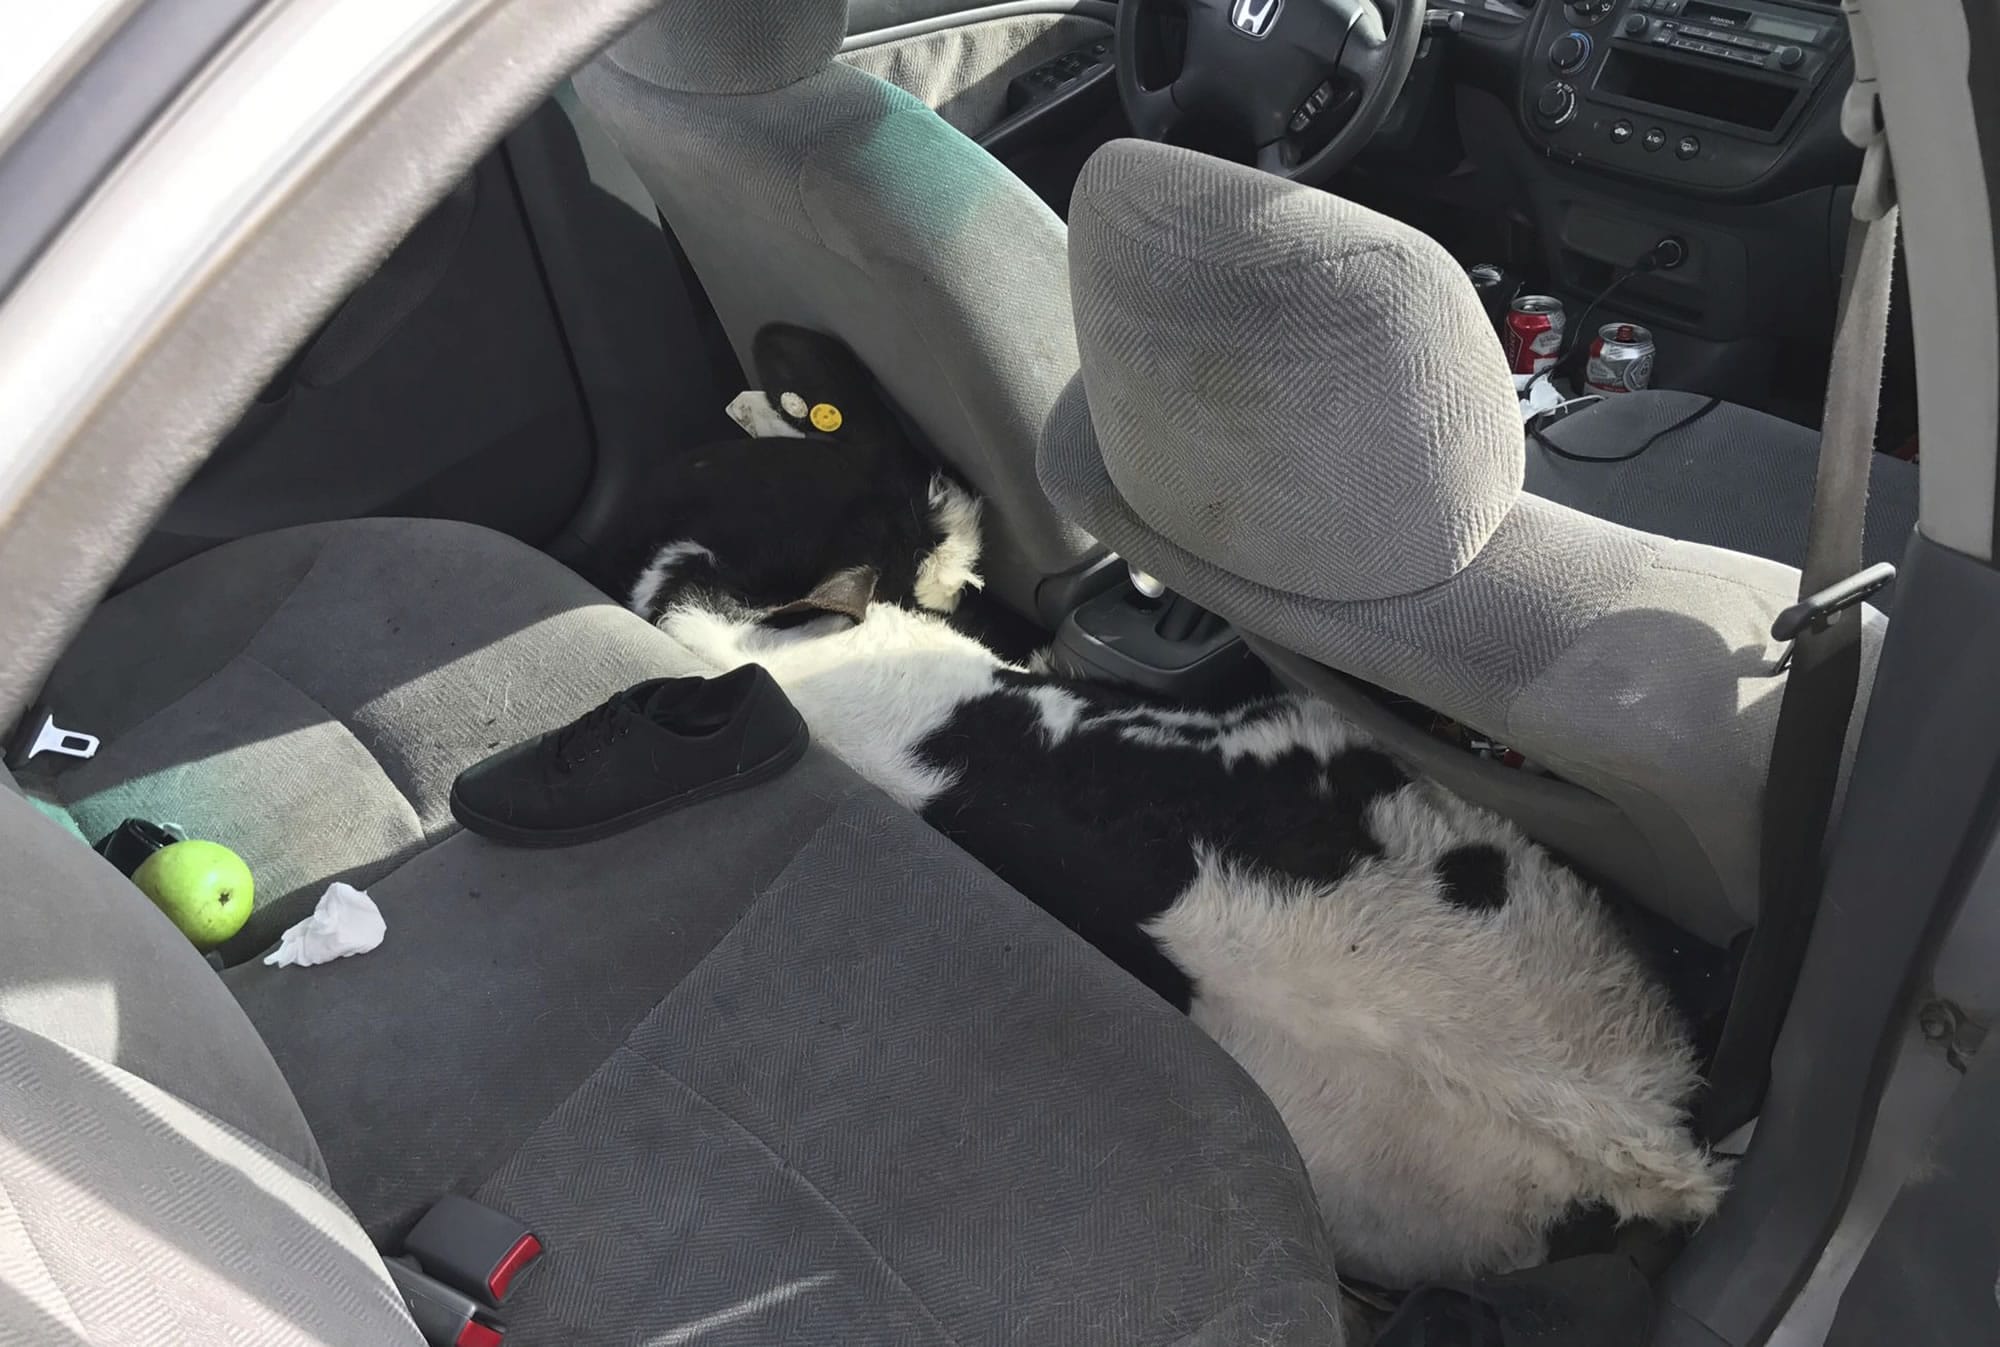 This March 4, 2017 photo provided by the California Highway Patrol San Gorgonio Pass shows a cow wedged between the front and back seat of a Honda Civic along the side of an interstate highway in Beaumont, Calif. It was one of the more unusual calls the California Highway Patrol had received, Someone reported seeing a cow trying to climb out of a small car parked alongside an interstate. Officers responding Saturday, along a mountain pass in Southern California's Riverside County discovered a calf trying to escape from a Honda Civic's open trunk. Another calf was crammed into the floor of the backseat.